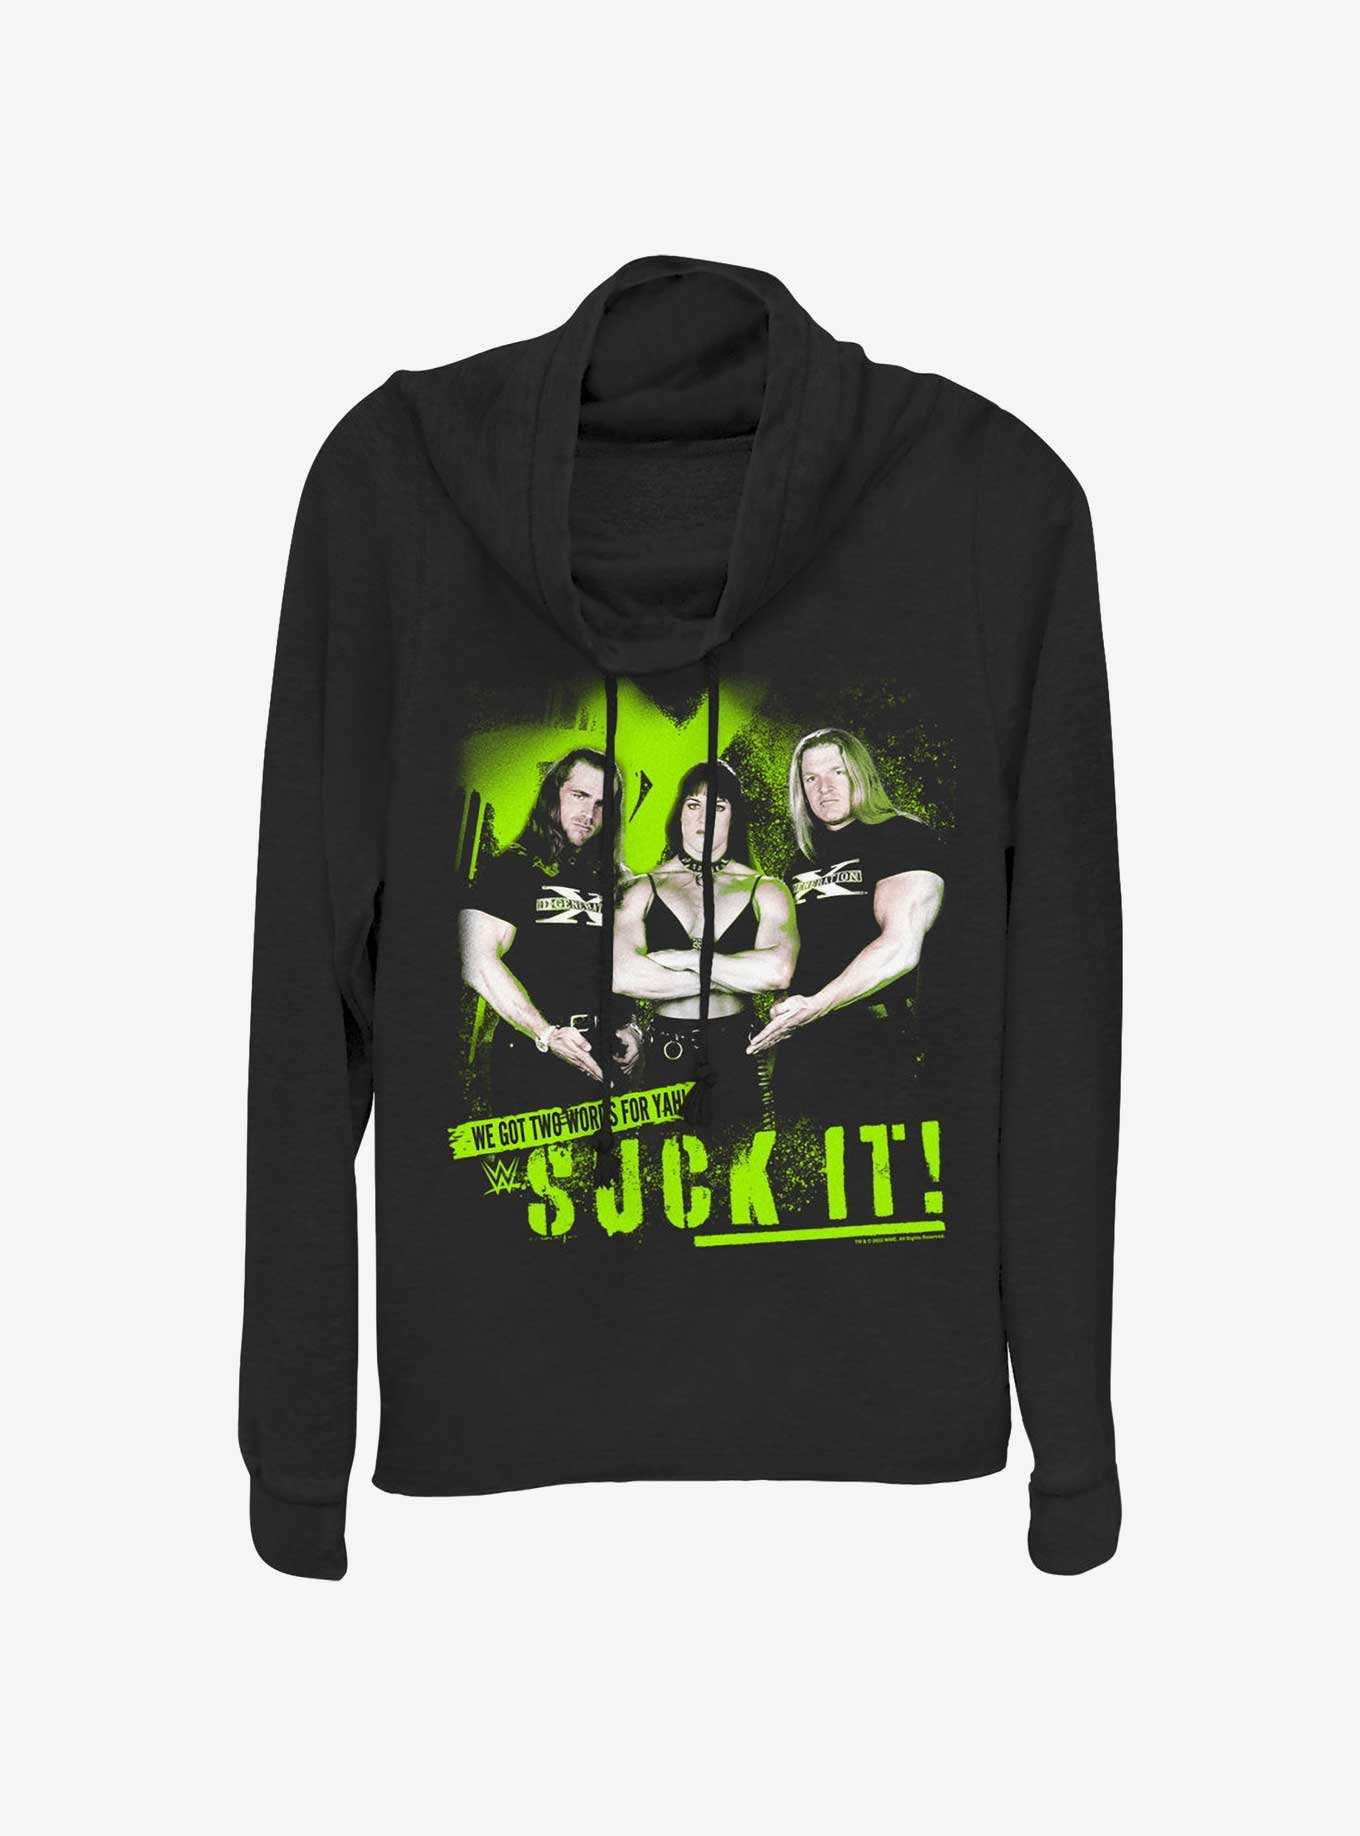 WWE DX Two Words For Yah Girls Cowl Neck Long-Sleeve Top, , hi-res